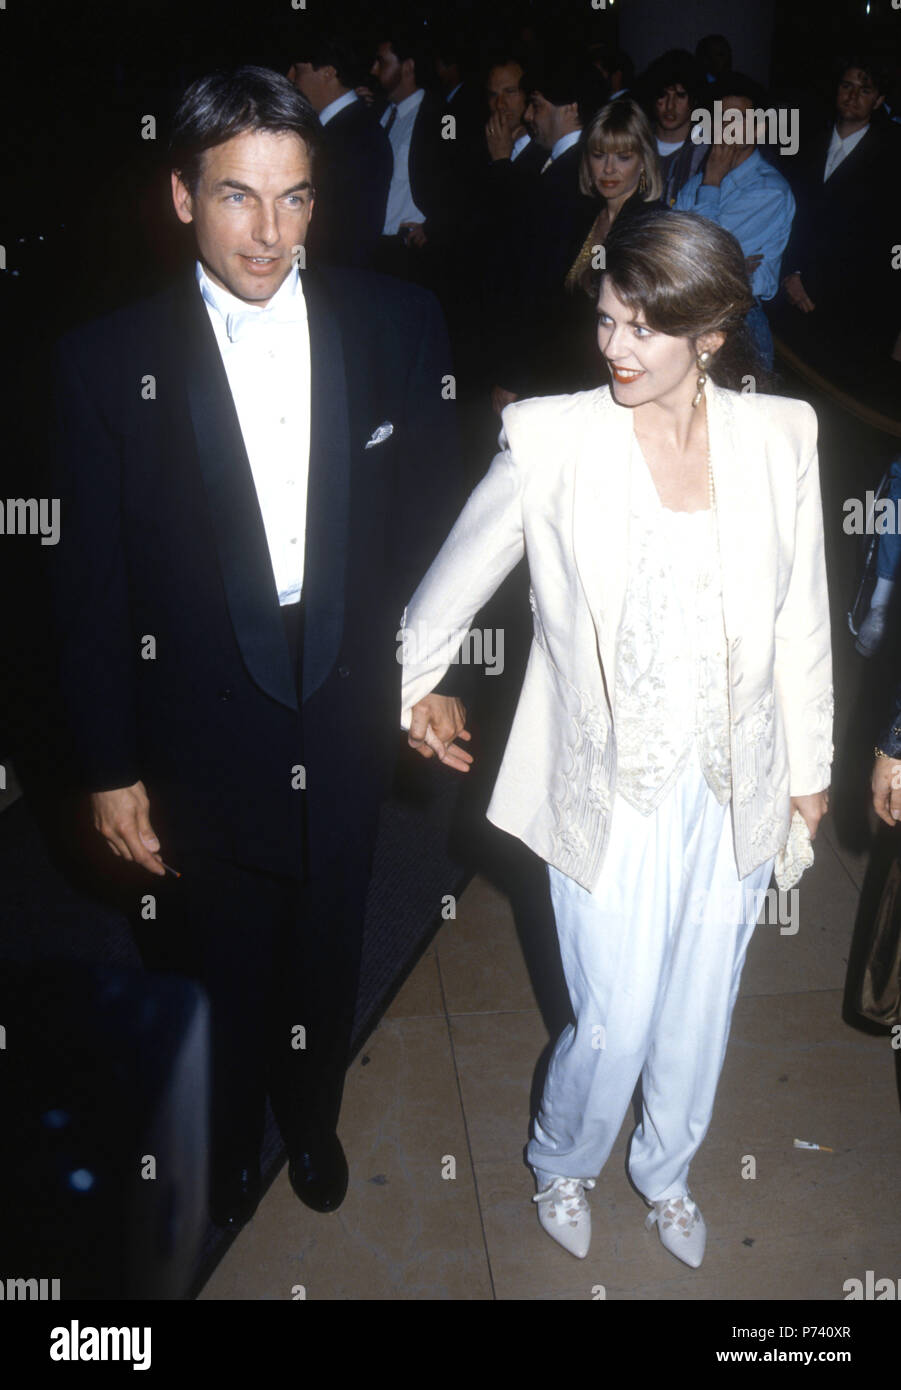 BEVERLY HILLS, CA - JANUARY 18: (L-R) Actor Mark Harmon and wife actress Pam Dawber attend the 49th Annual Golden Globe Awards on January 18, 1992 at the Beverly Hilton Hotel in Beverly Hills, California. Photo by Barry King/Alamy Stock Photo Stock Photo